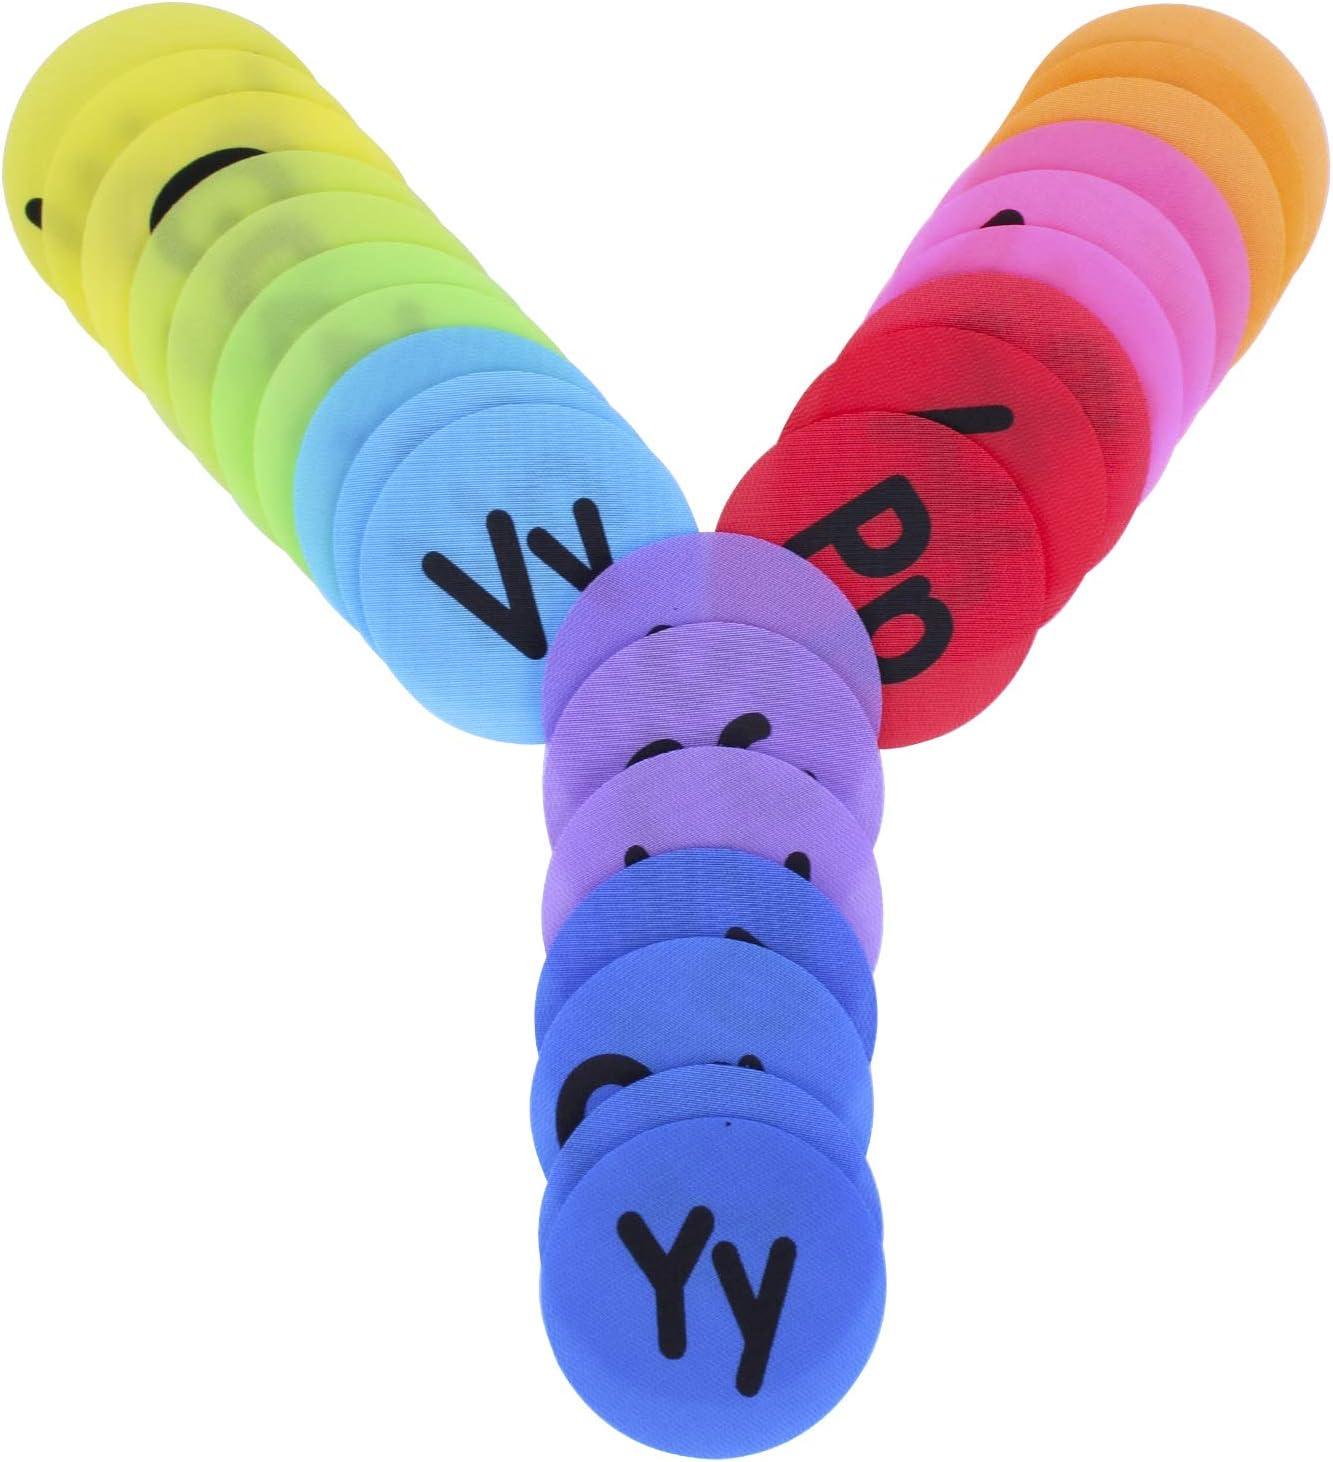 8 Pairs Feet Markers Classroom Markers Colorful Spot Floor Markers  Footprint Shaped Non Slip Rubber Carpet Markers for Kids Home School  Classroom